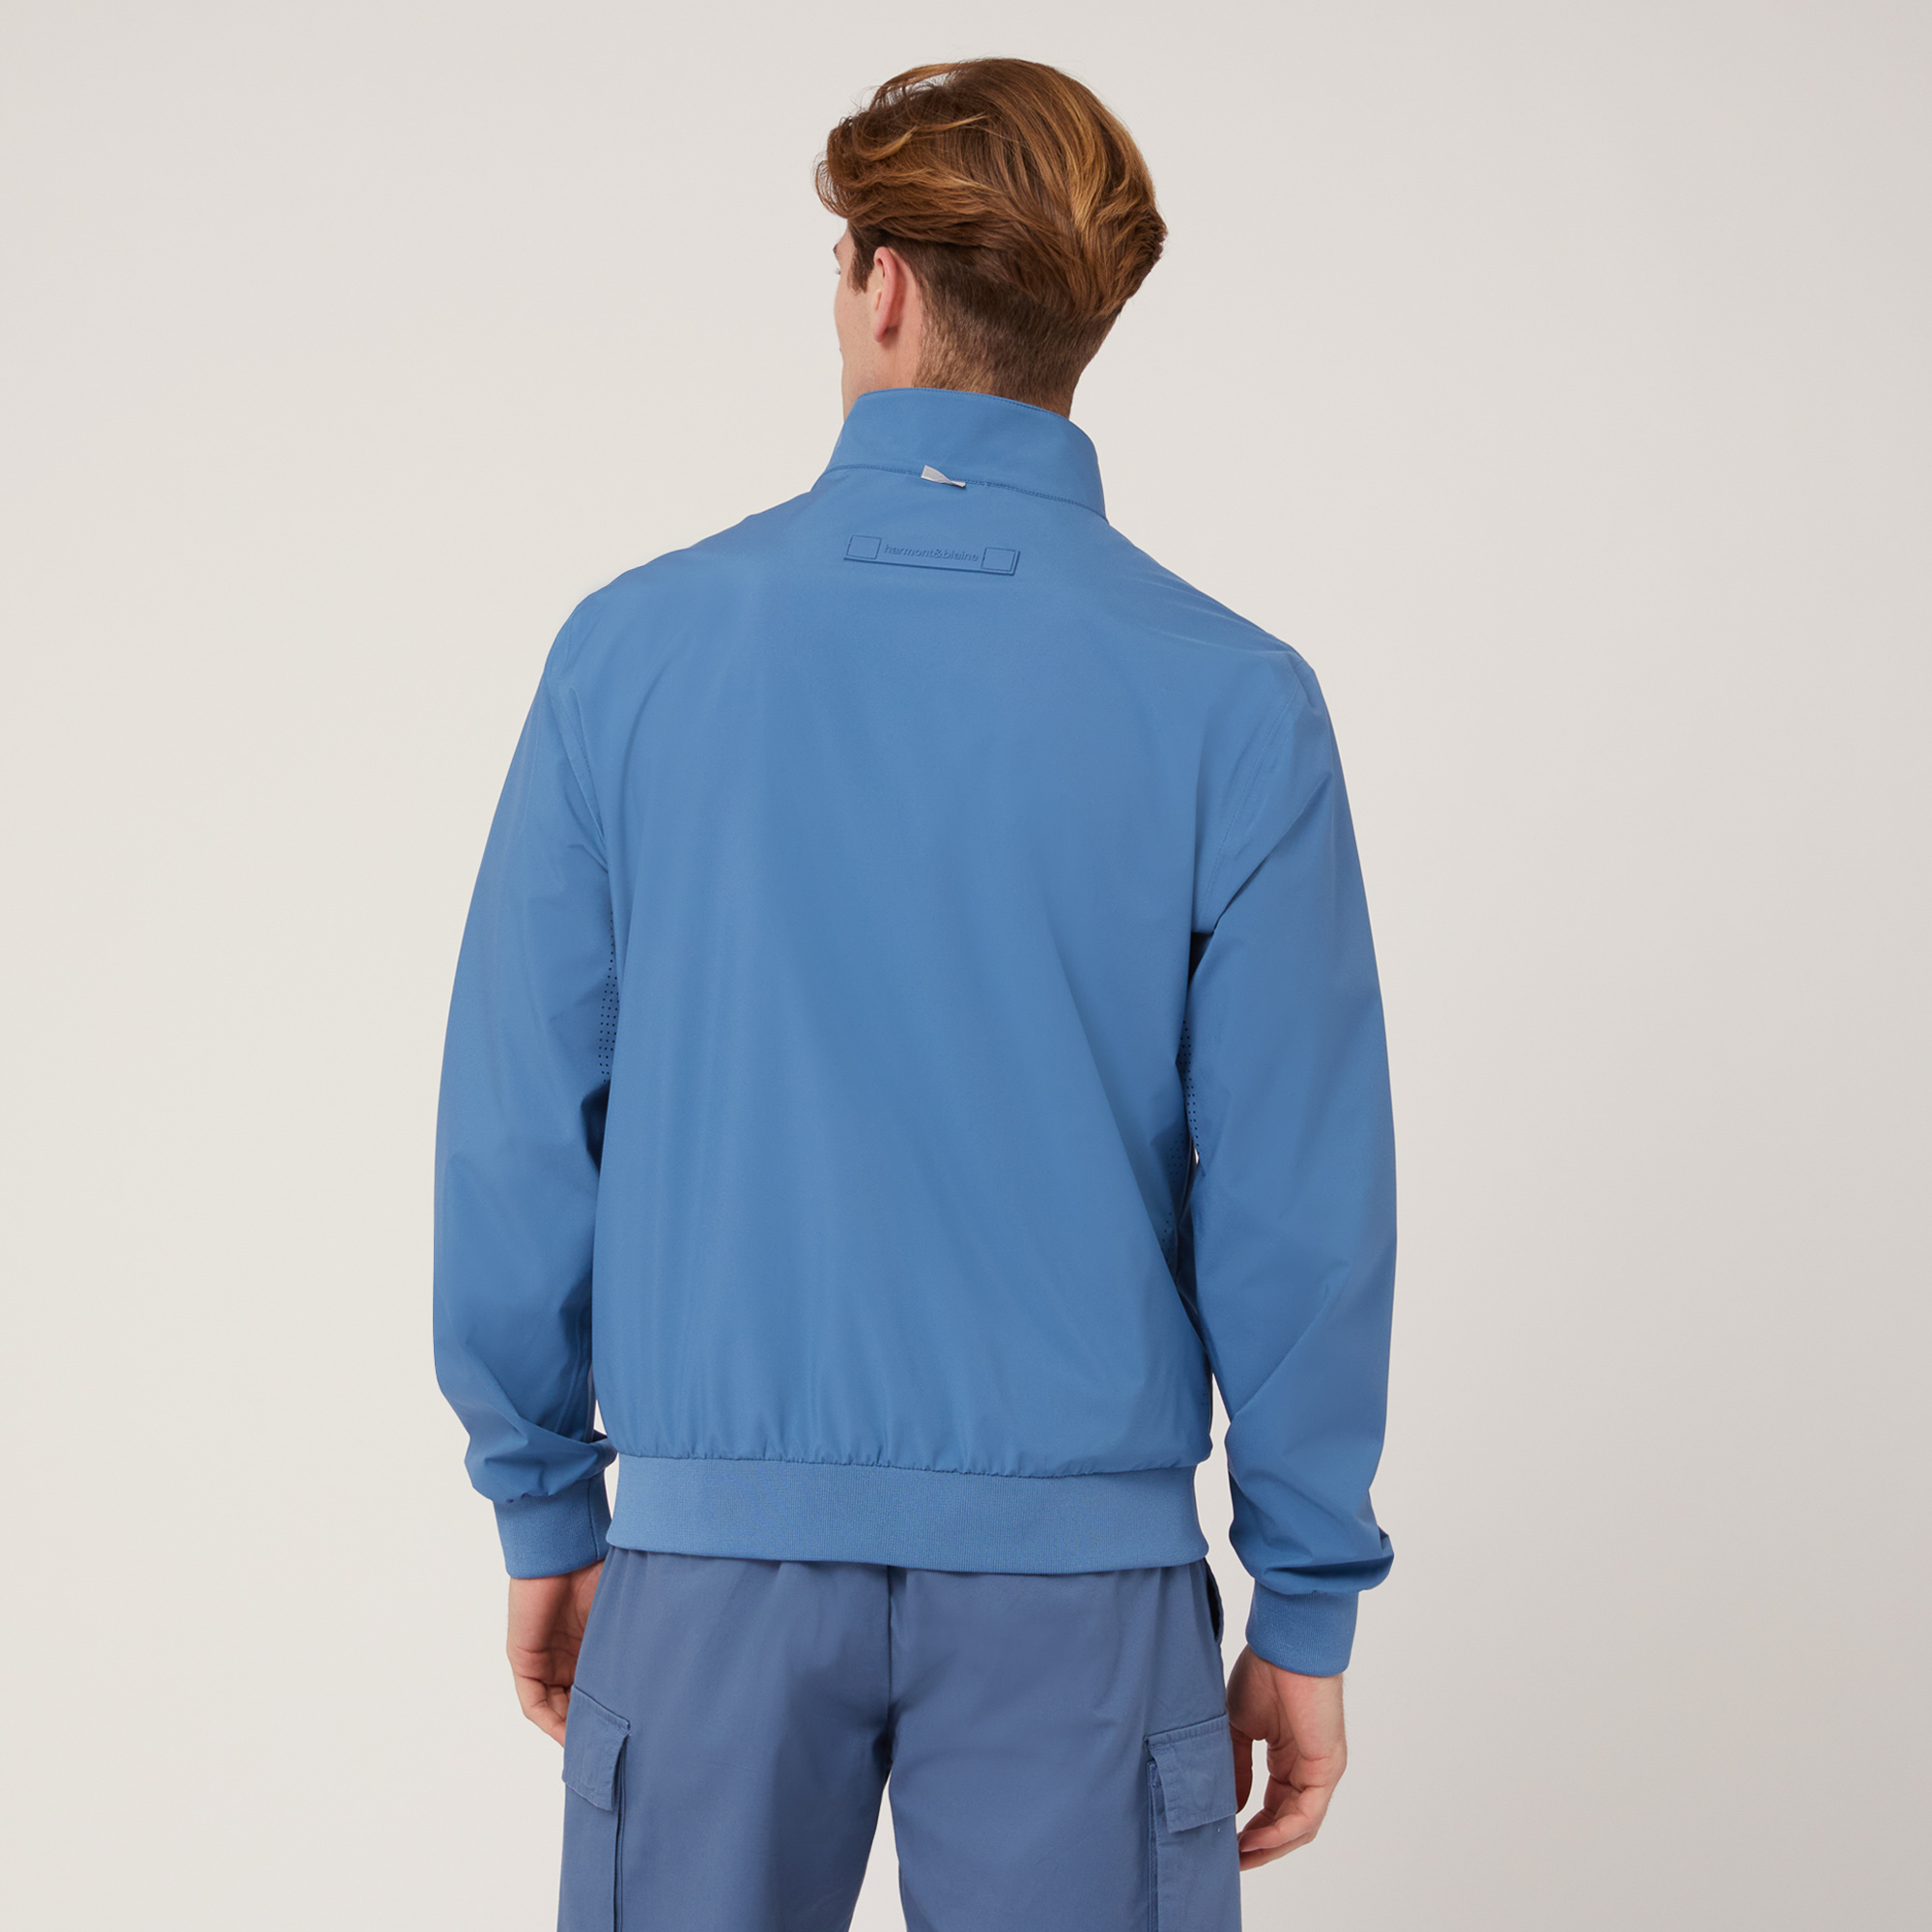 Giubbotto In Softshell, Blu, large image number 1